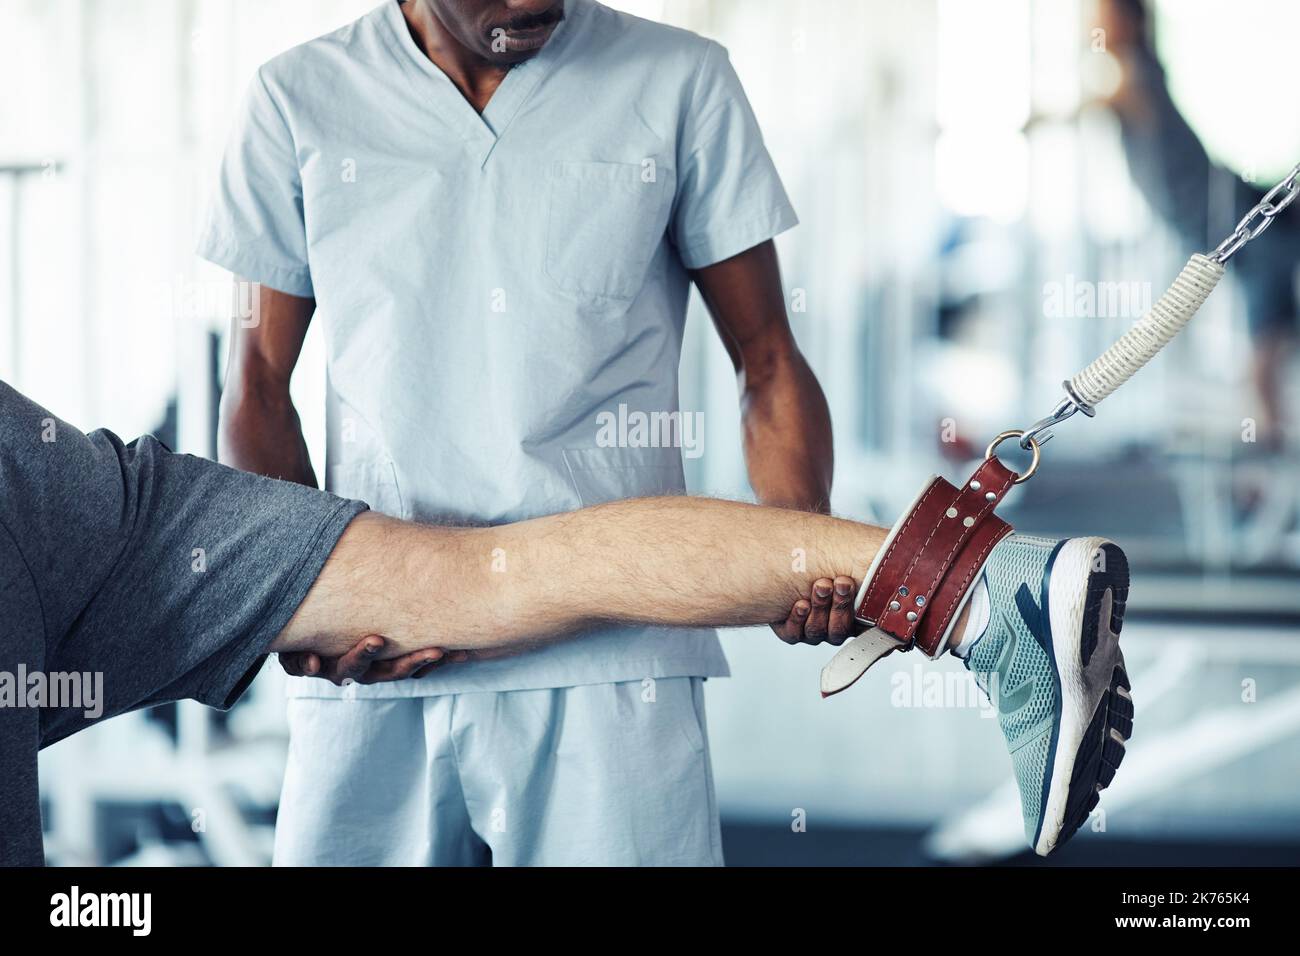 Close-up of therapist in uniform holding leg of patient while he doing stretching exercises in gym Stock Photo